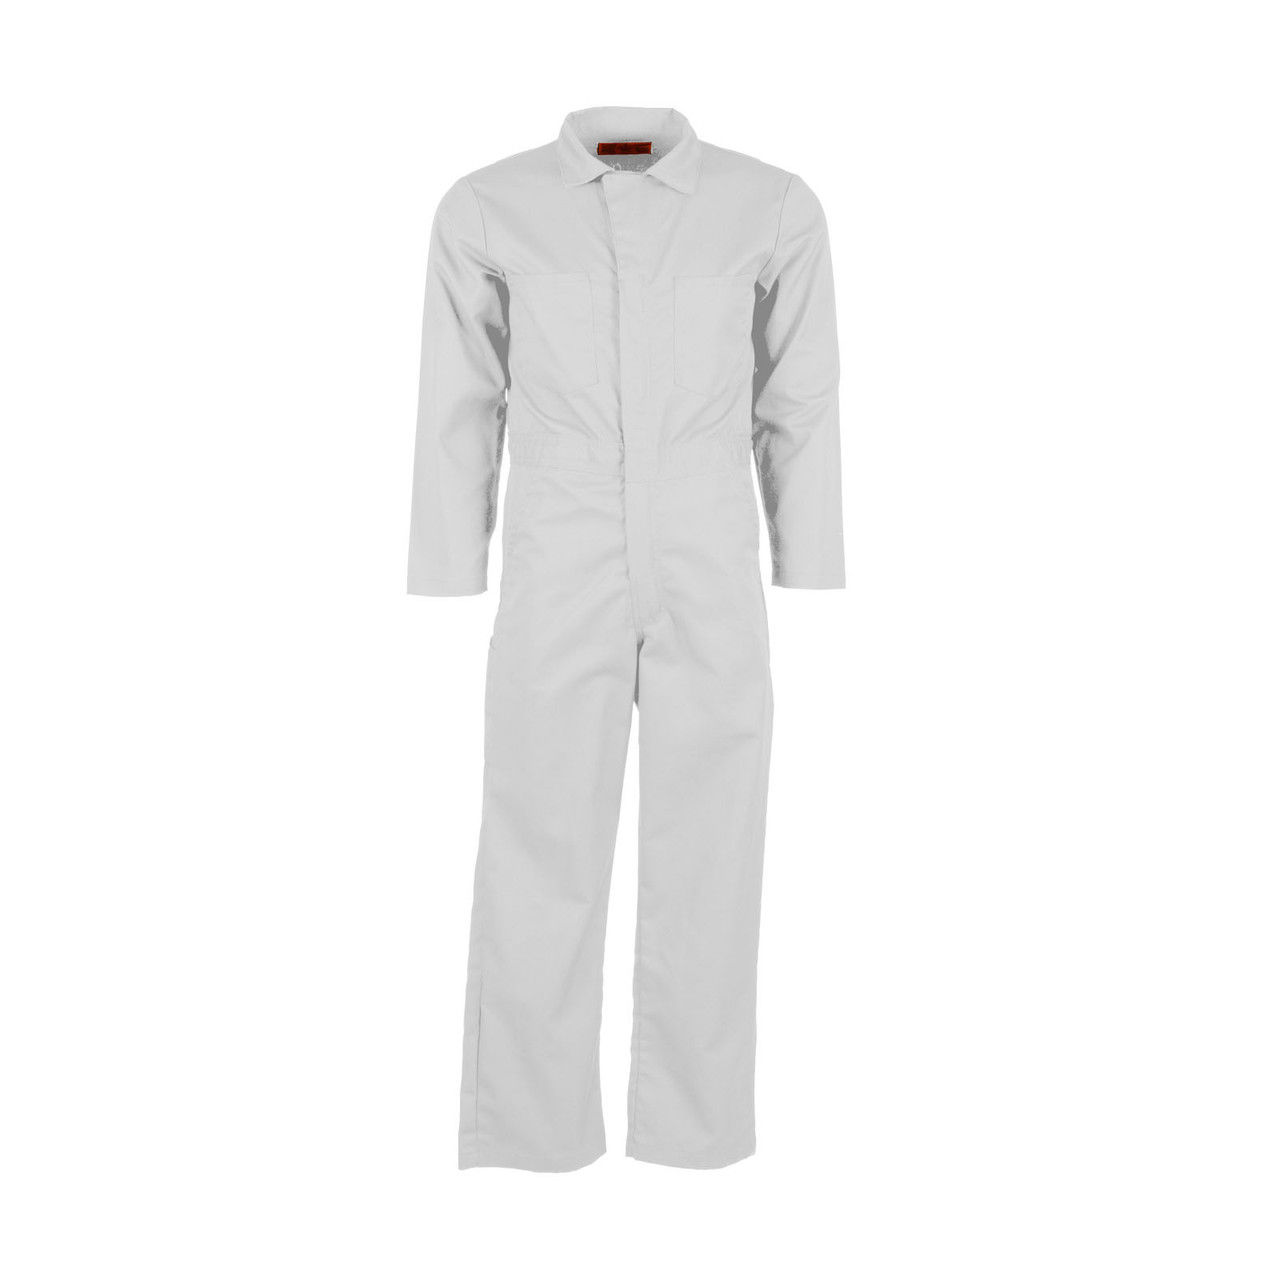 What are the key features of Pinnacle Textile's CV10WH white coveralls?